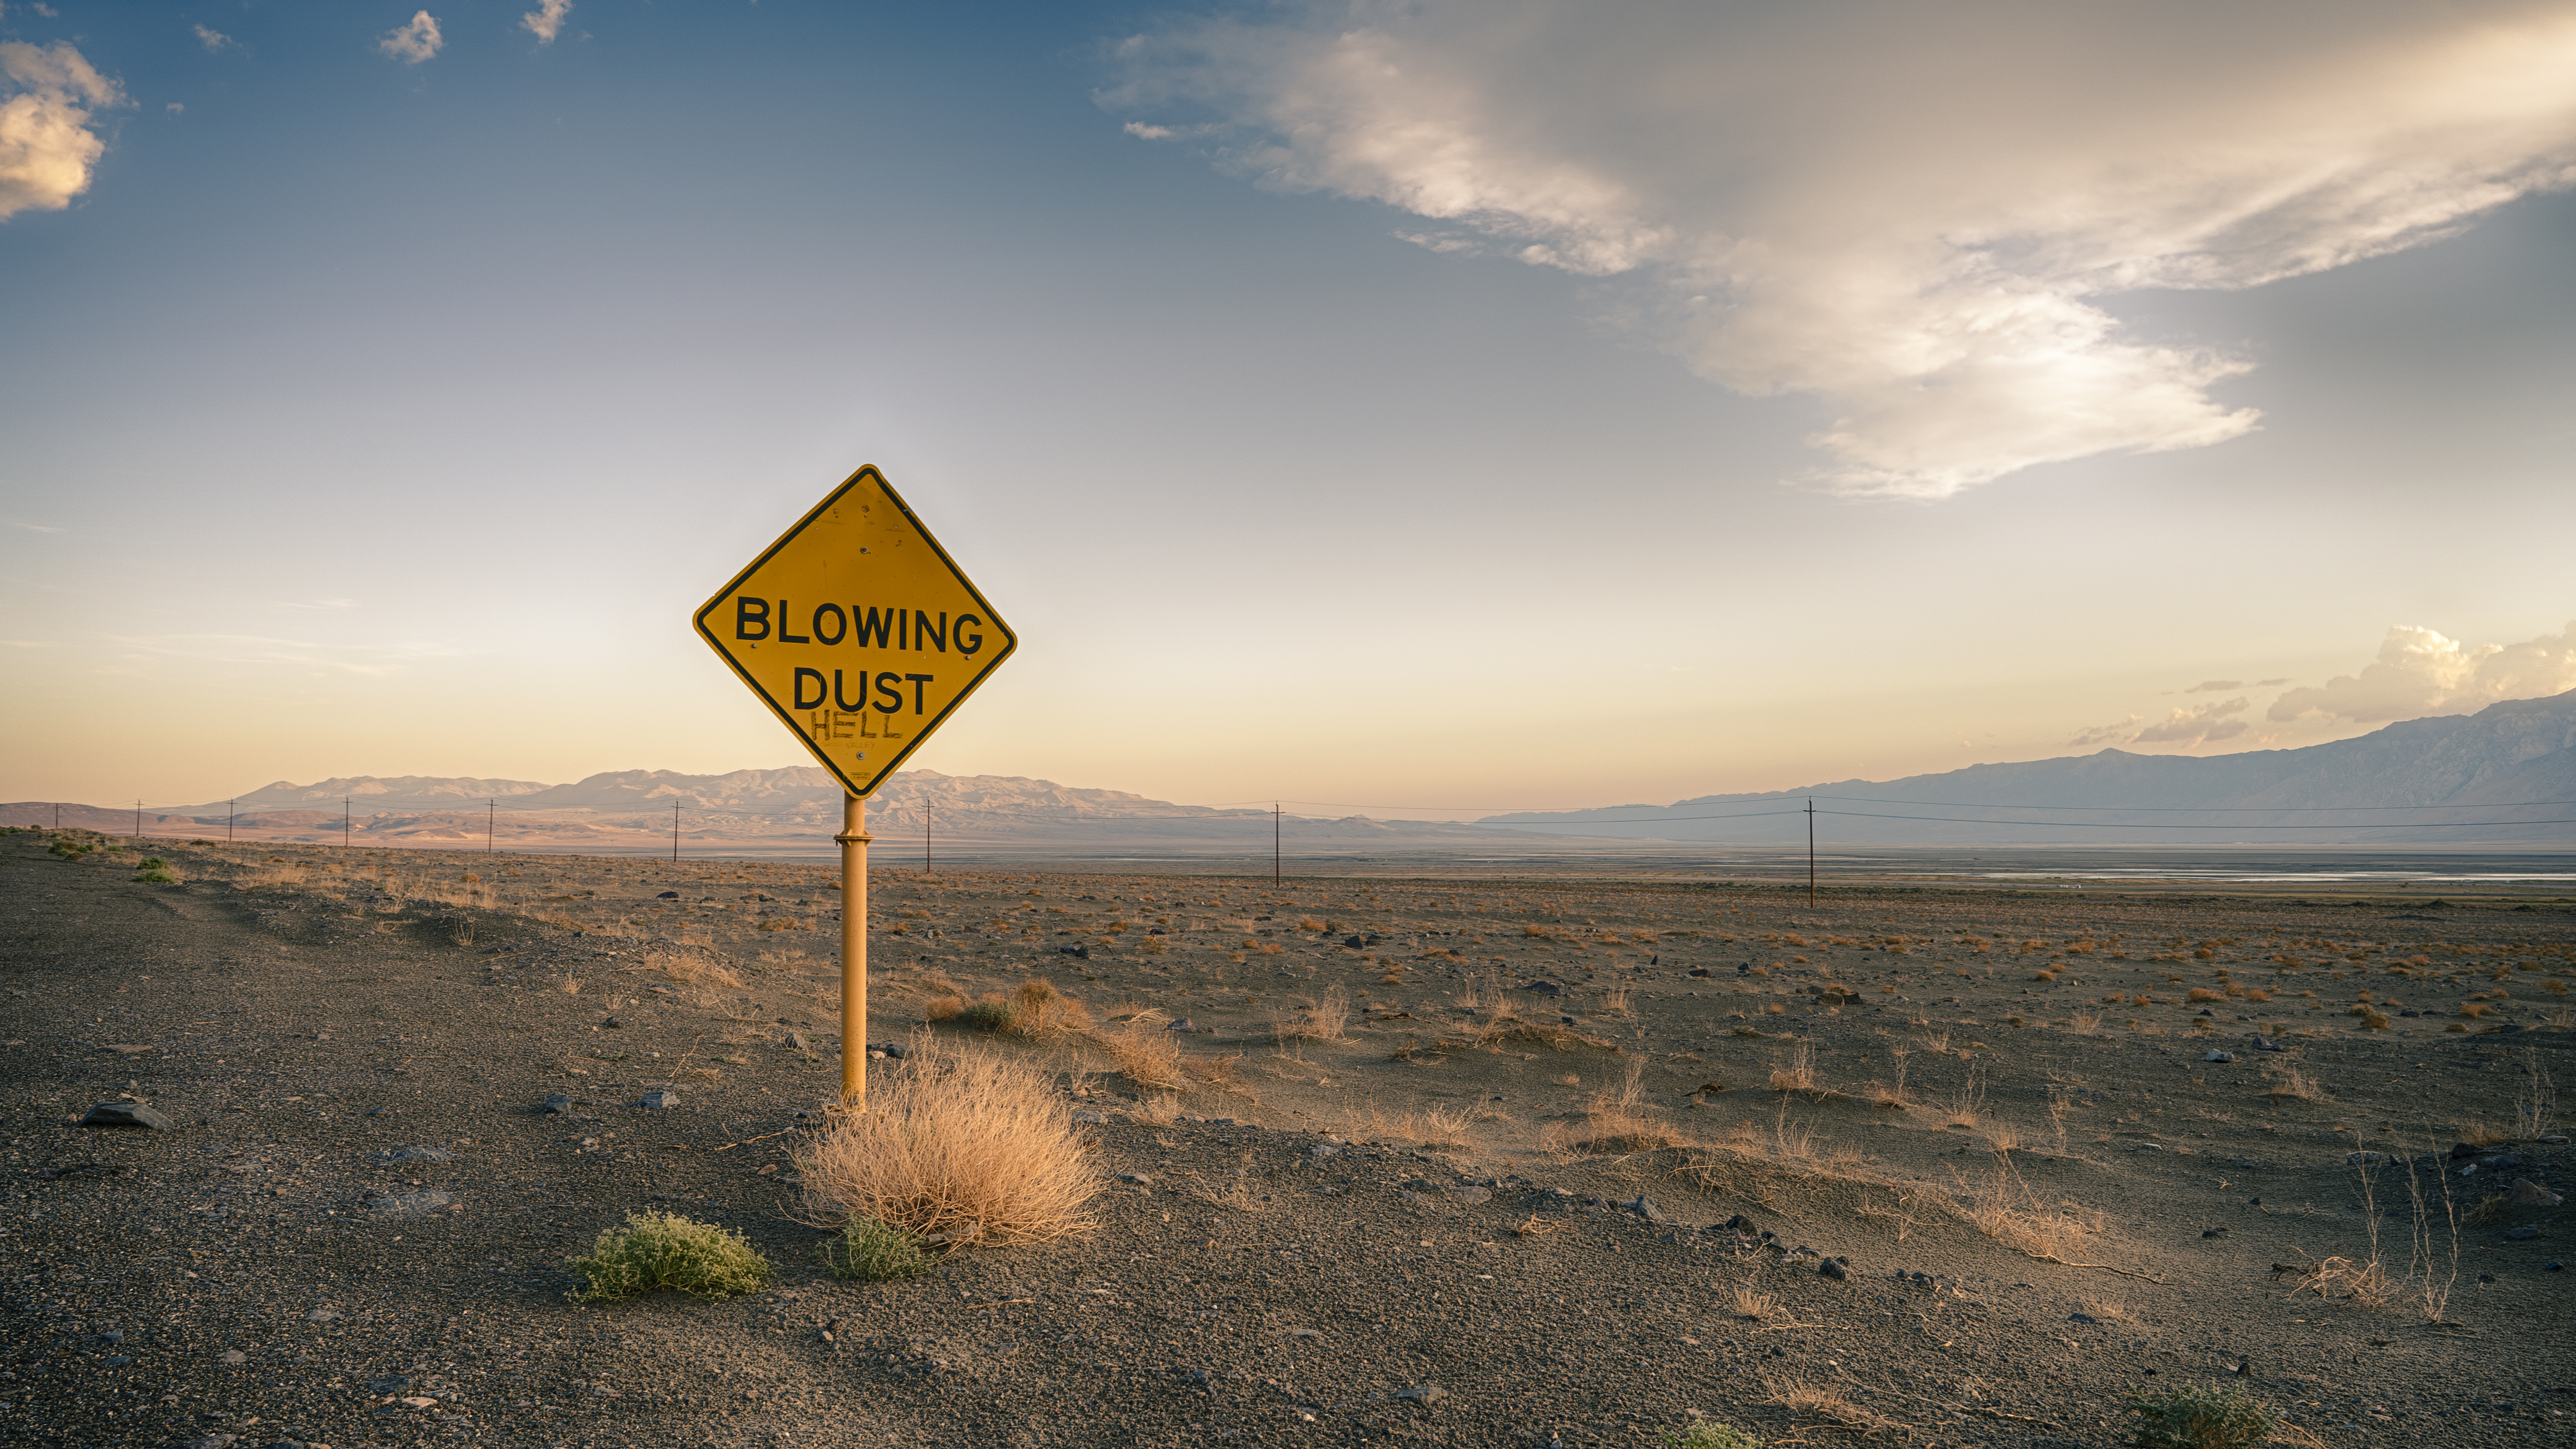 General 5764x3243 Owens Lake Owens Valley Sierra Nevada California dry lake road sign photography clouds dust sky sign mountains landscape USA